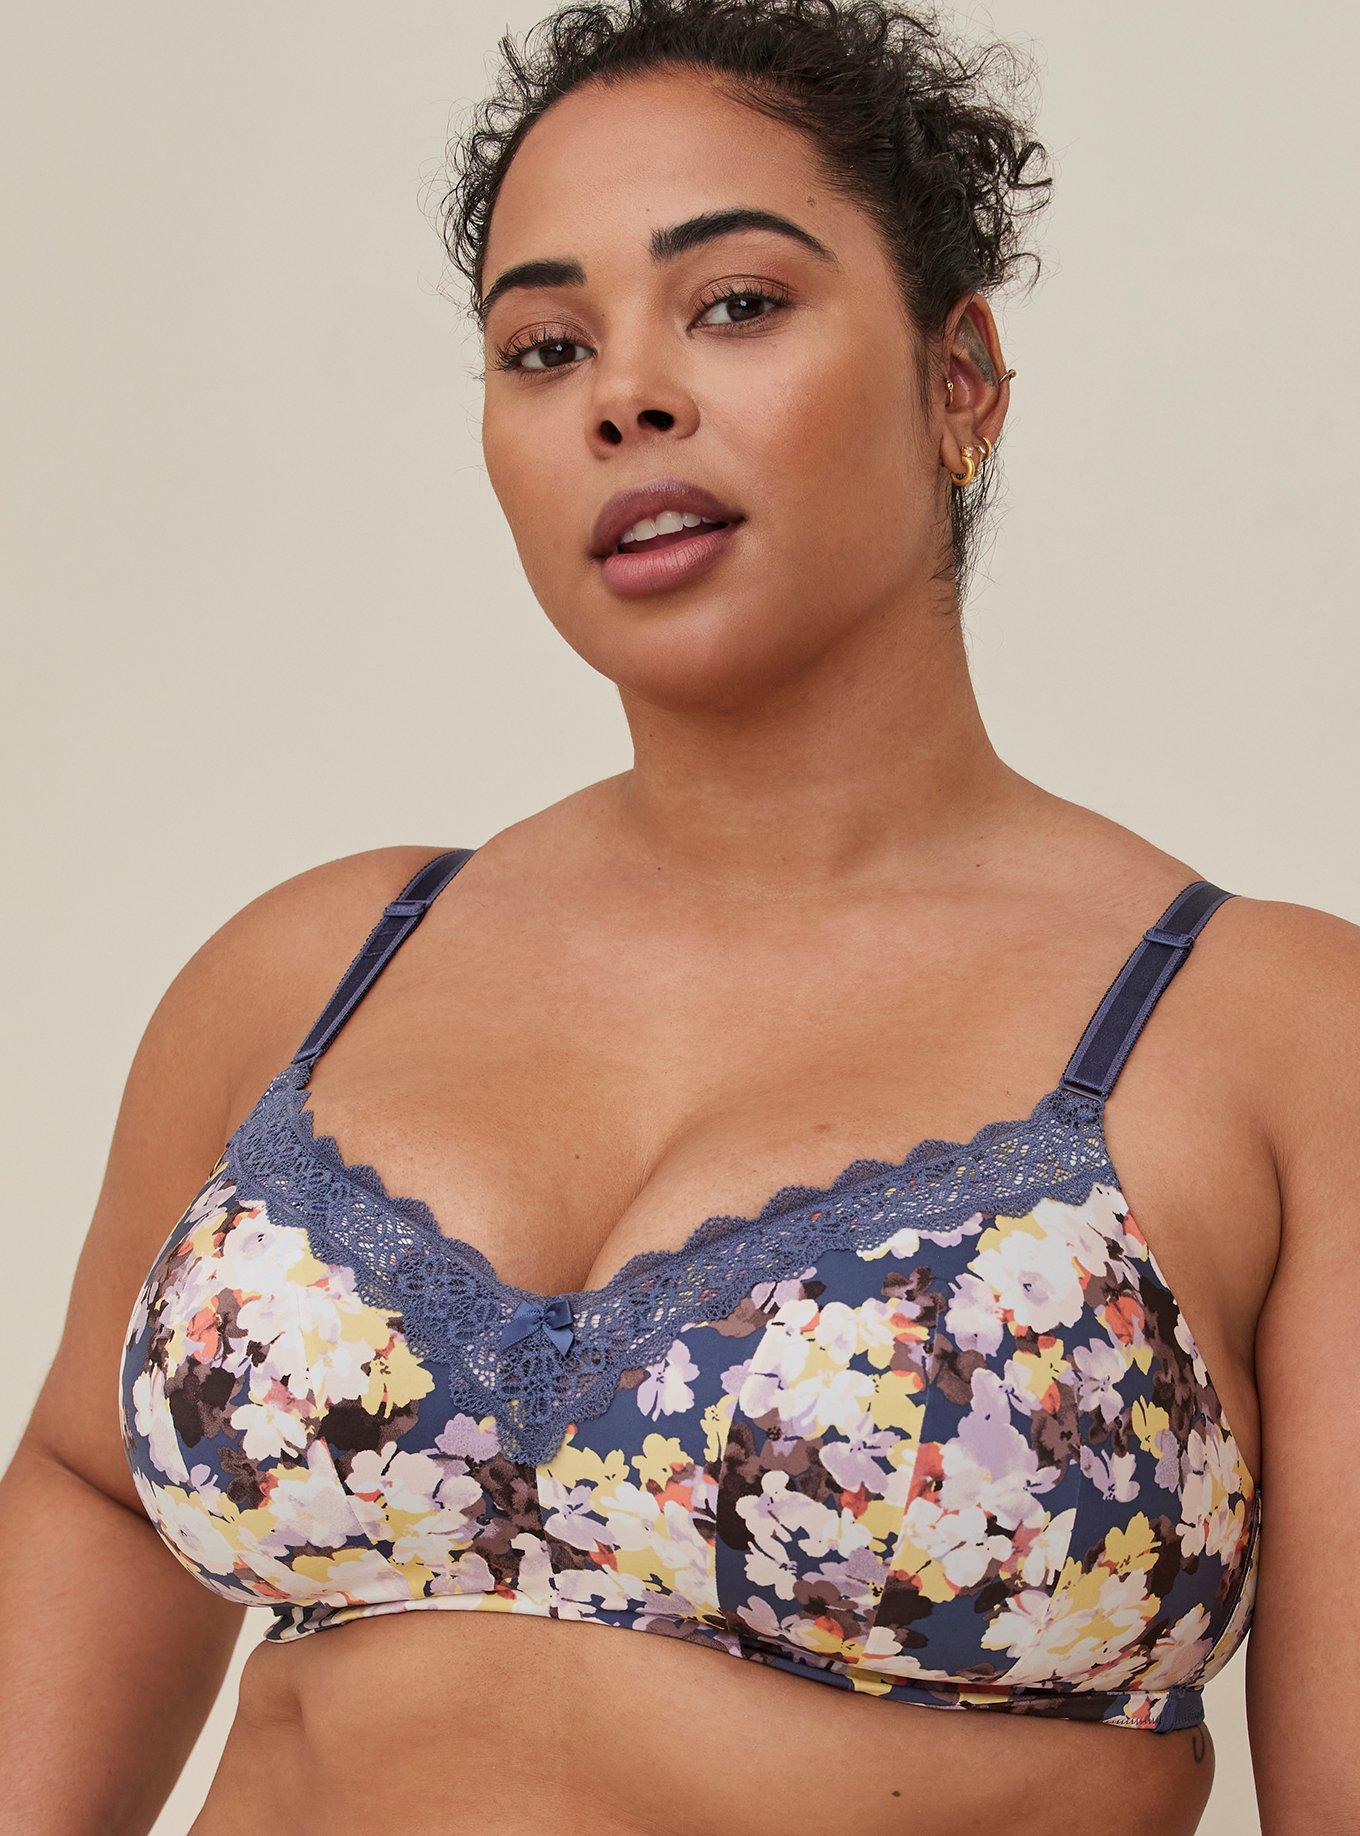 NEW!!! - TORRID WIRE-FREE 360° / BACK SMOOTHING BRA - Size 44C